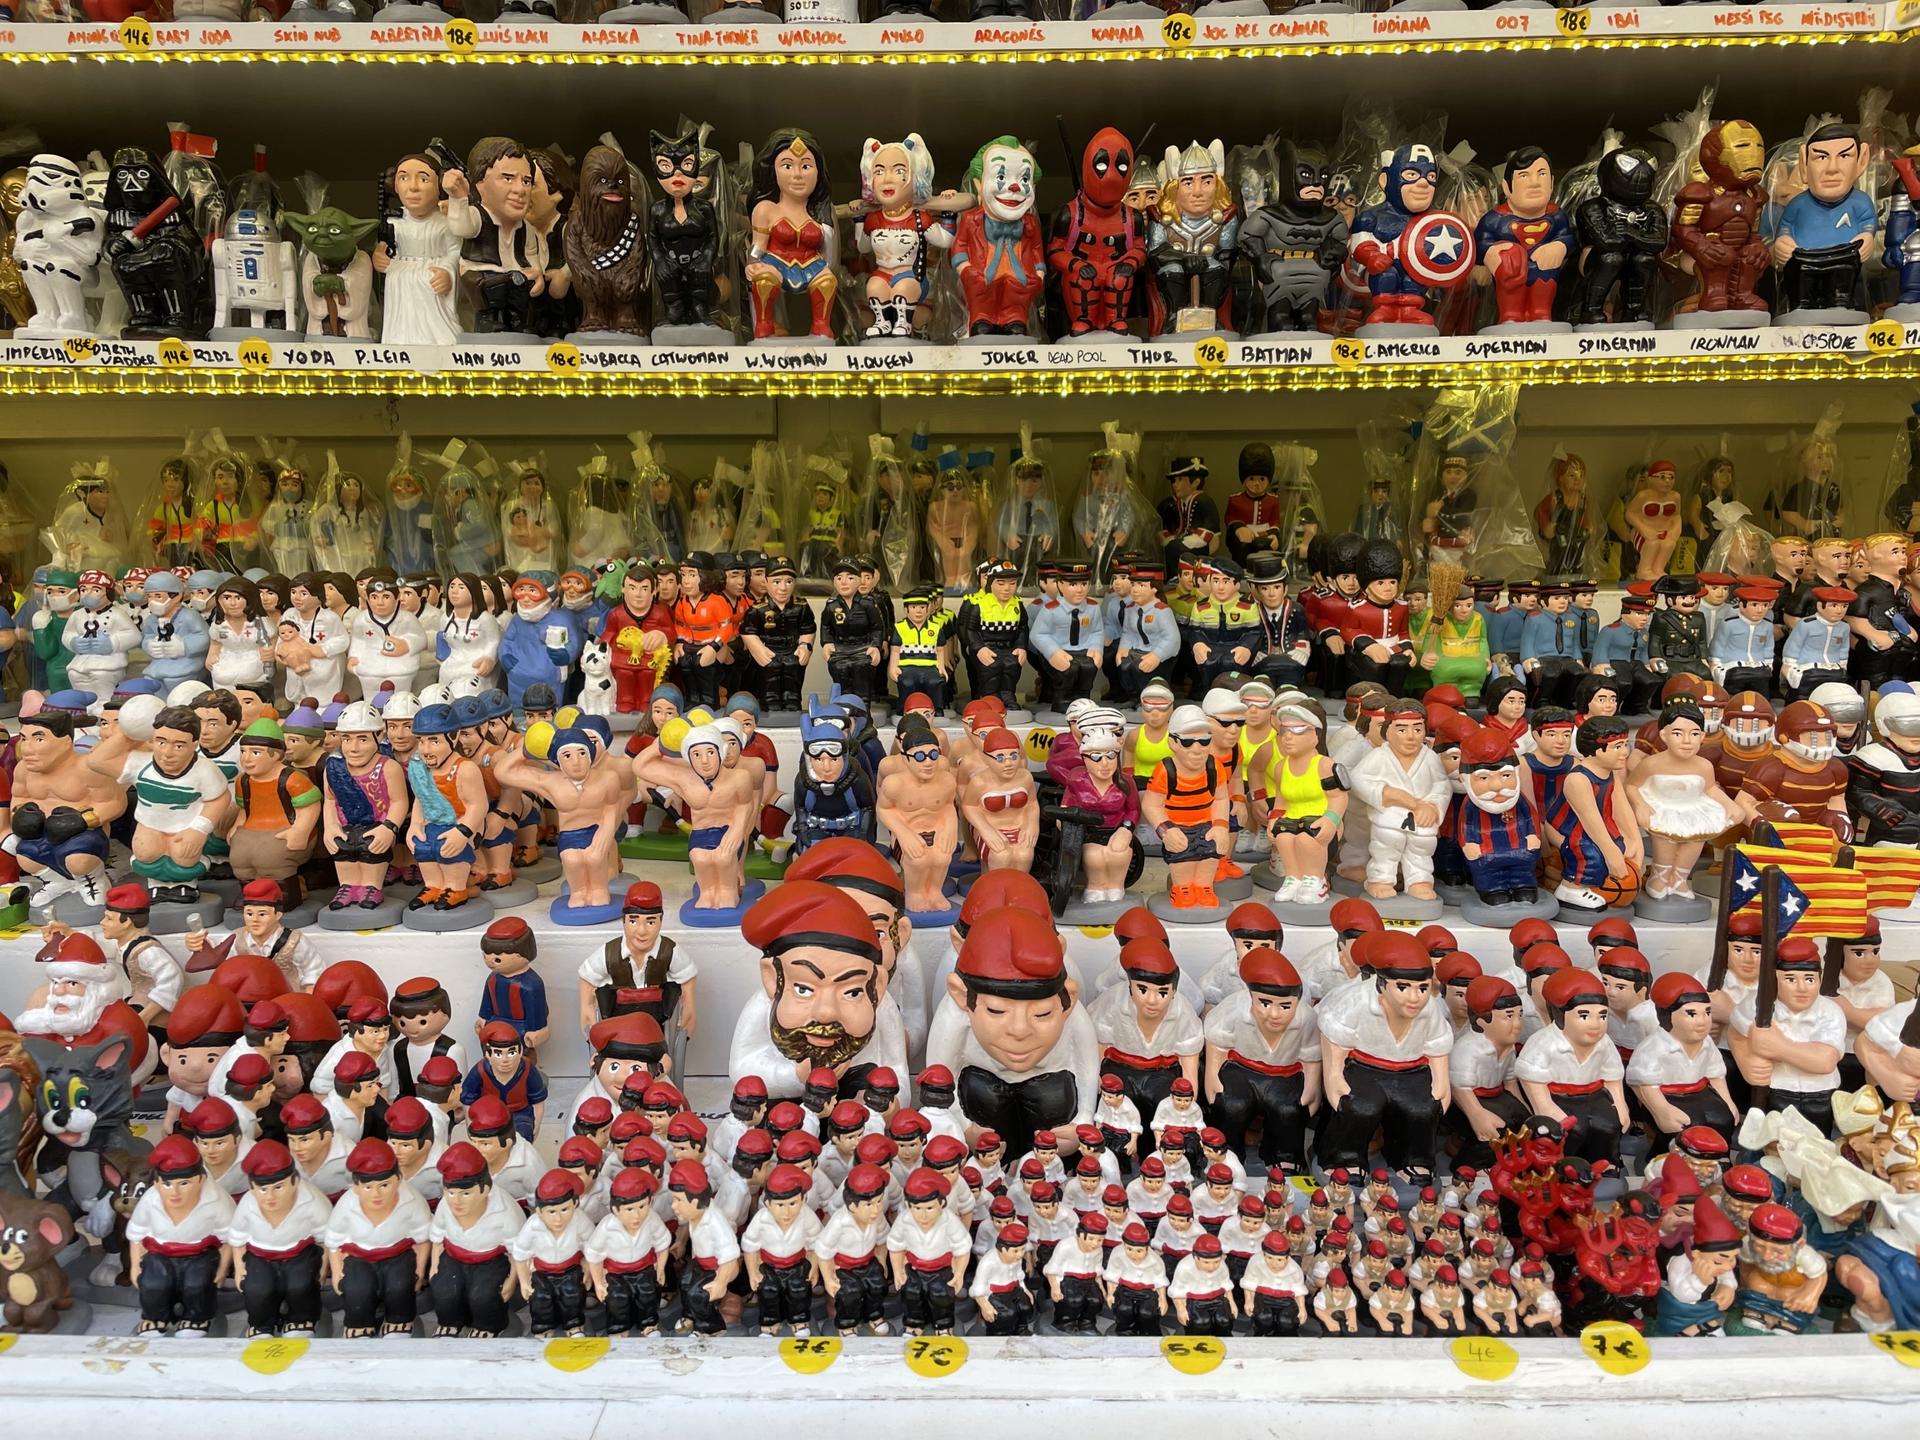 A Caganer, which means "pooping person," is placed on nativity scenes in Catalonia. While they're originally depicted as peasants, vendors now sell all kinds of characters.